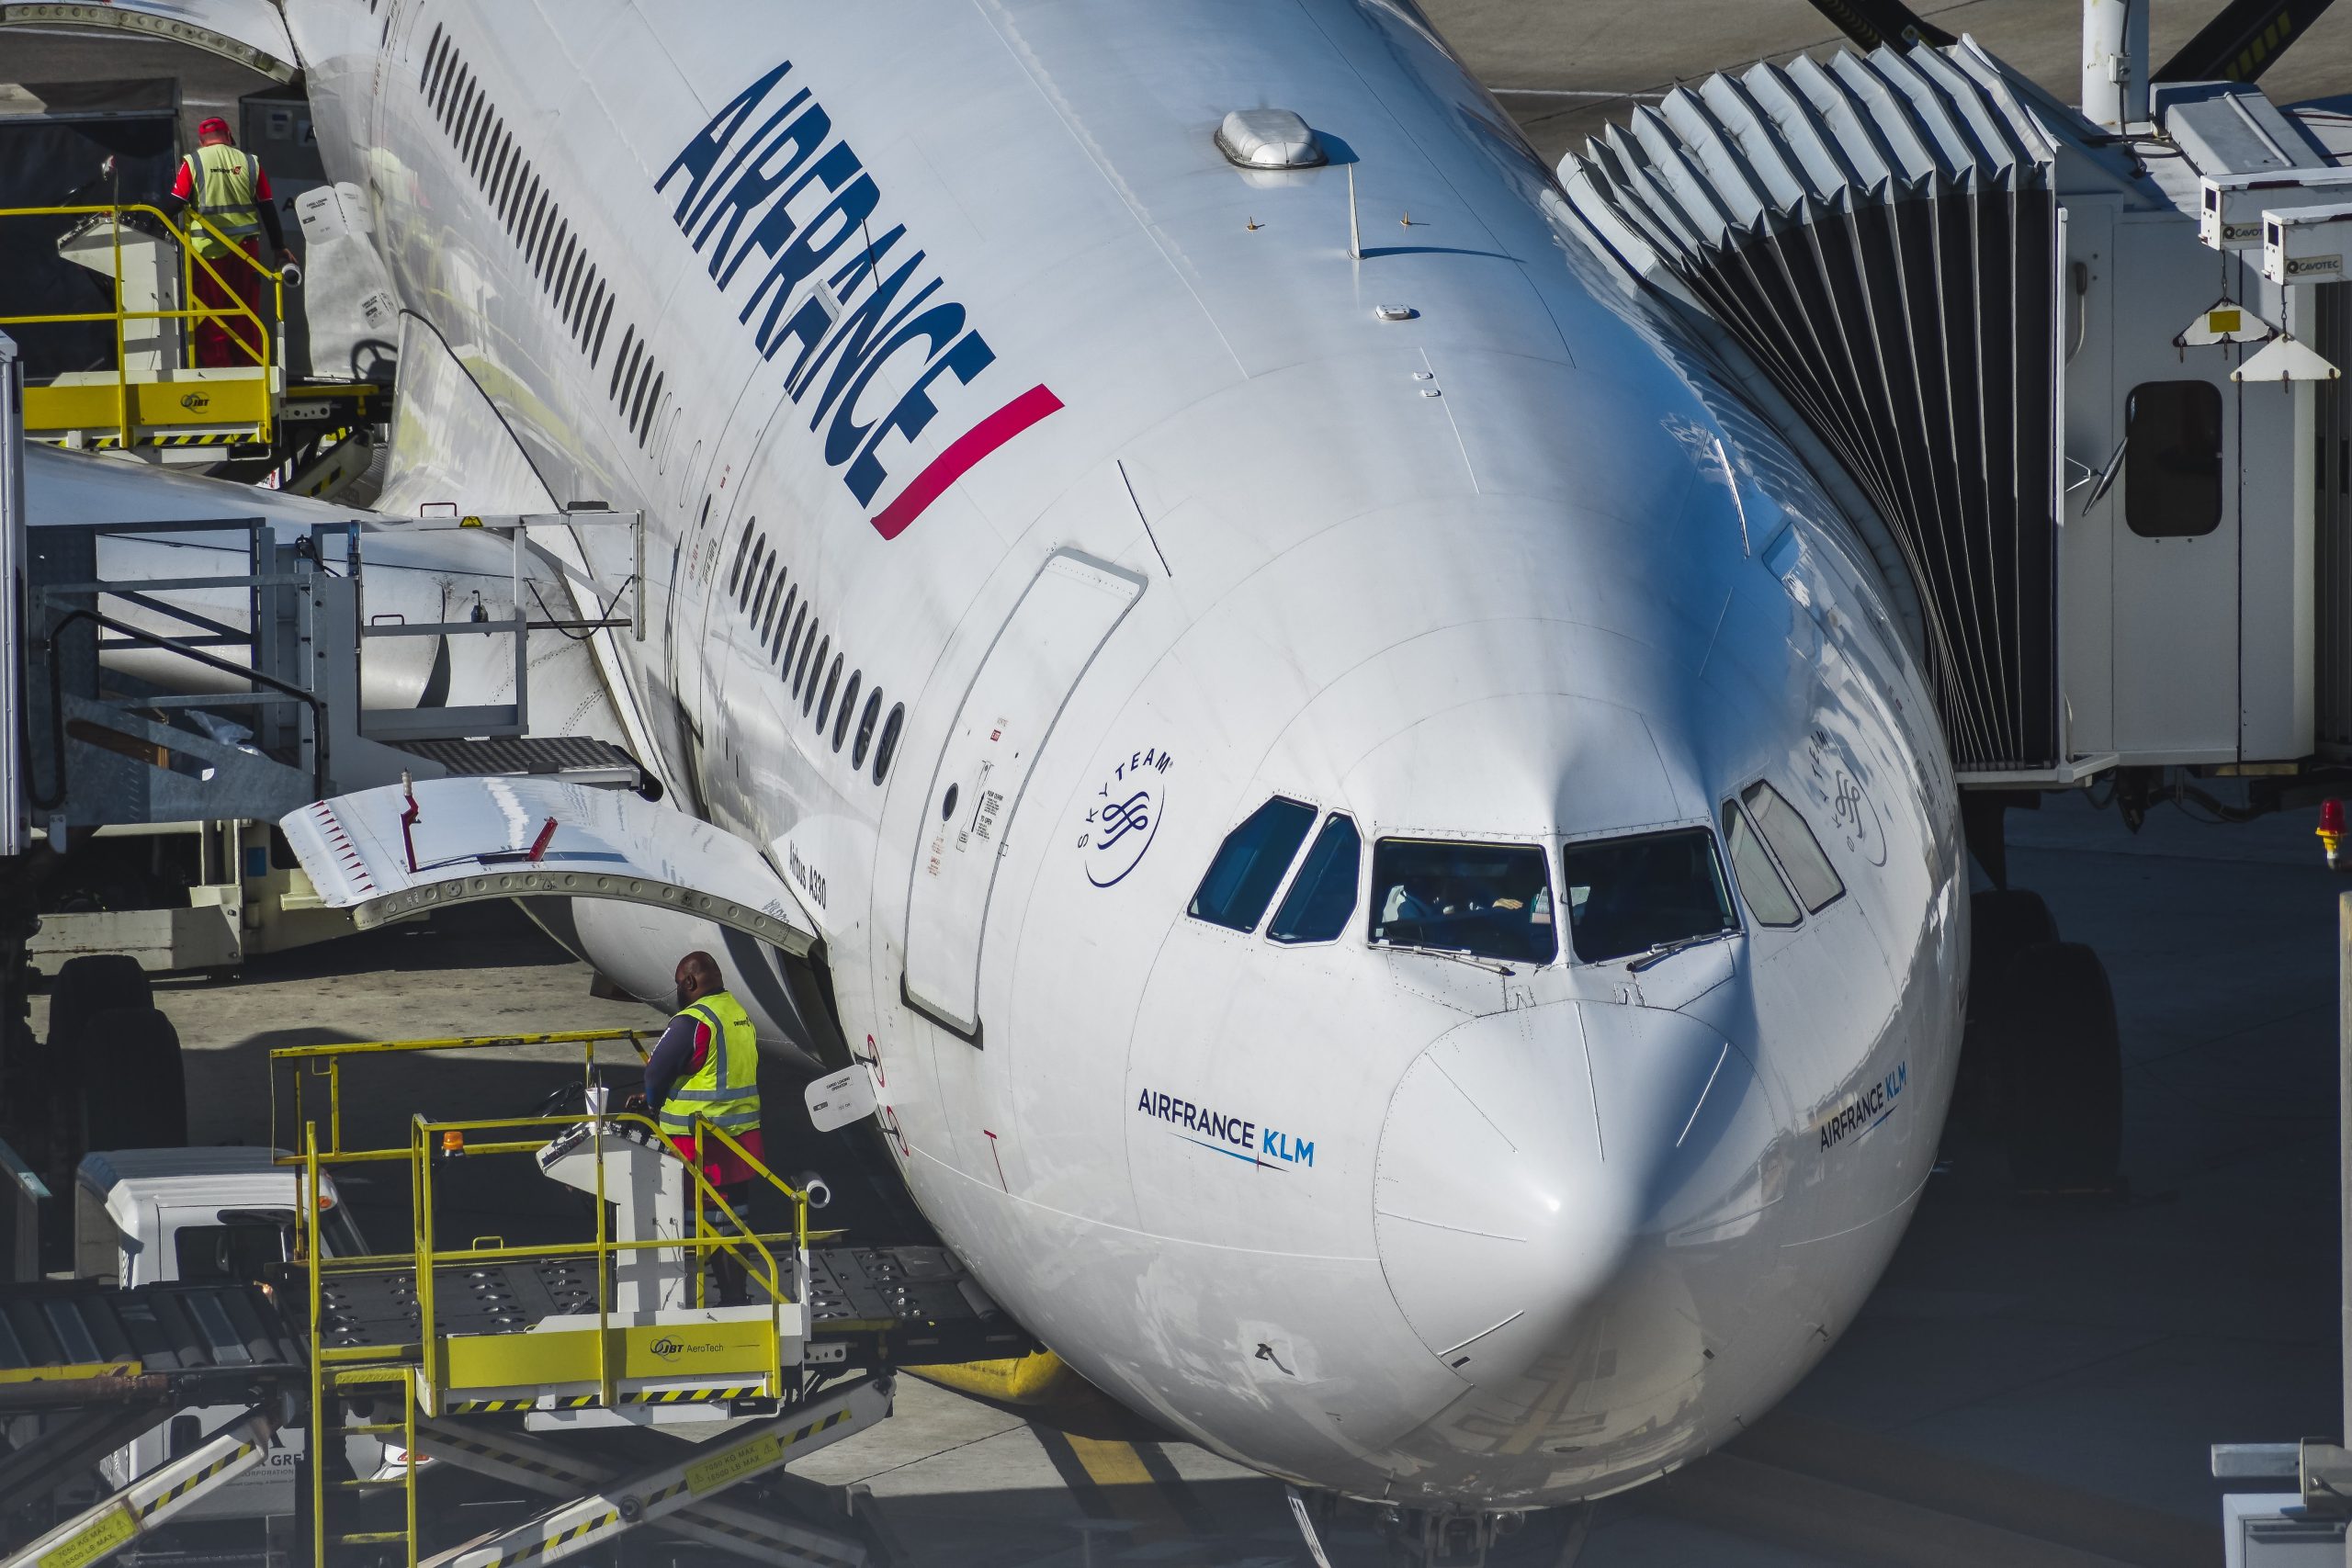 Air France A330 at gate. Photo by CapDfrawy